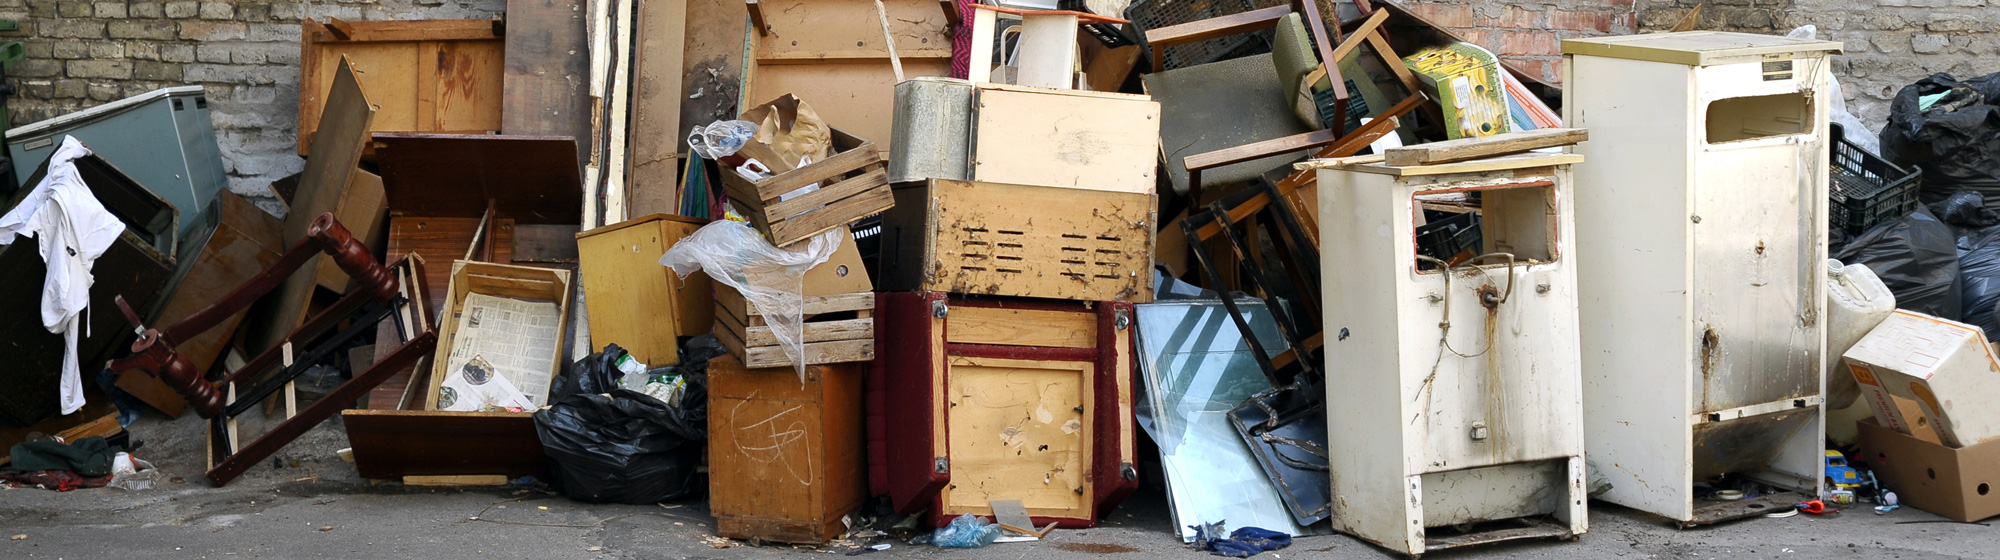 A range of household items that have been flytipped